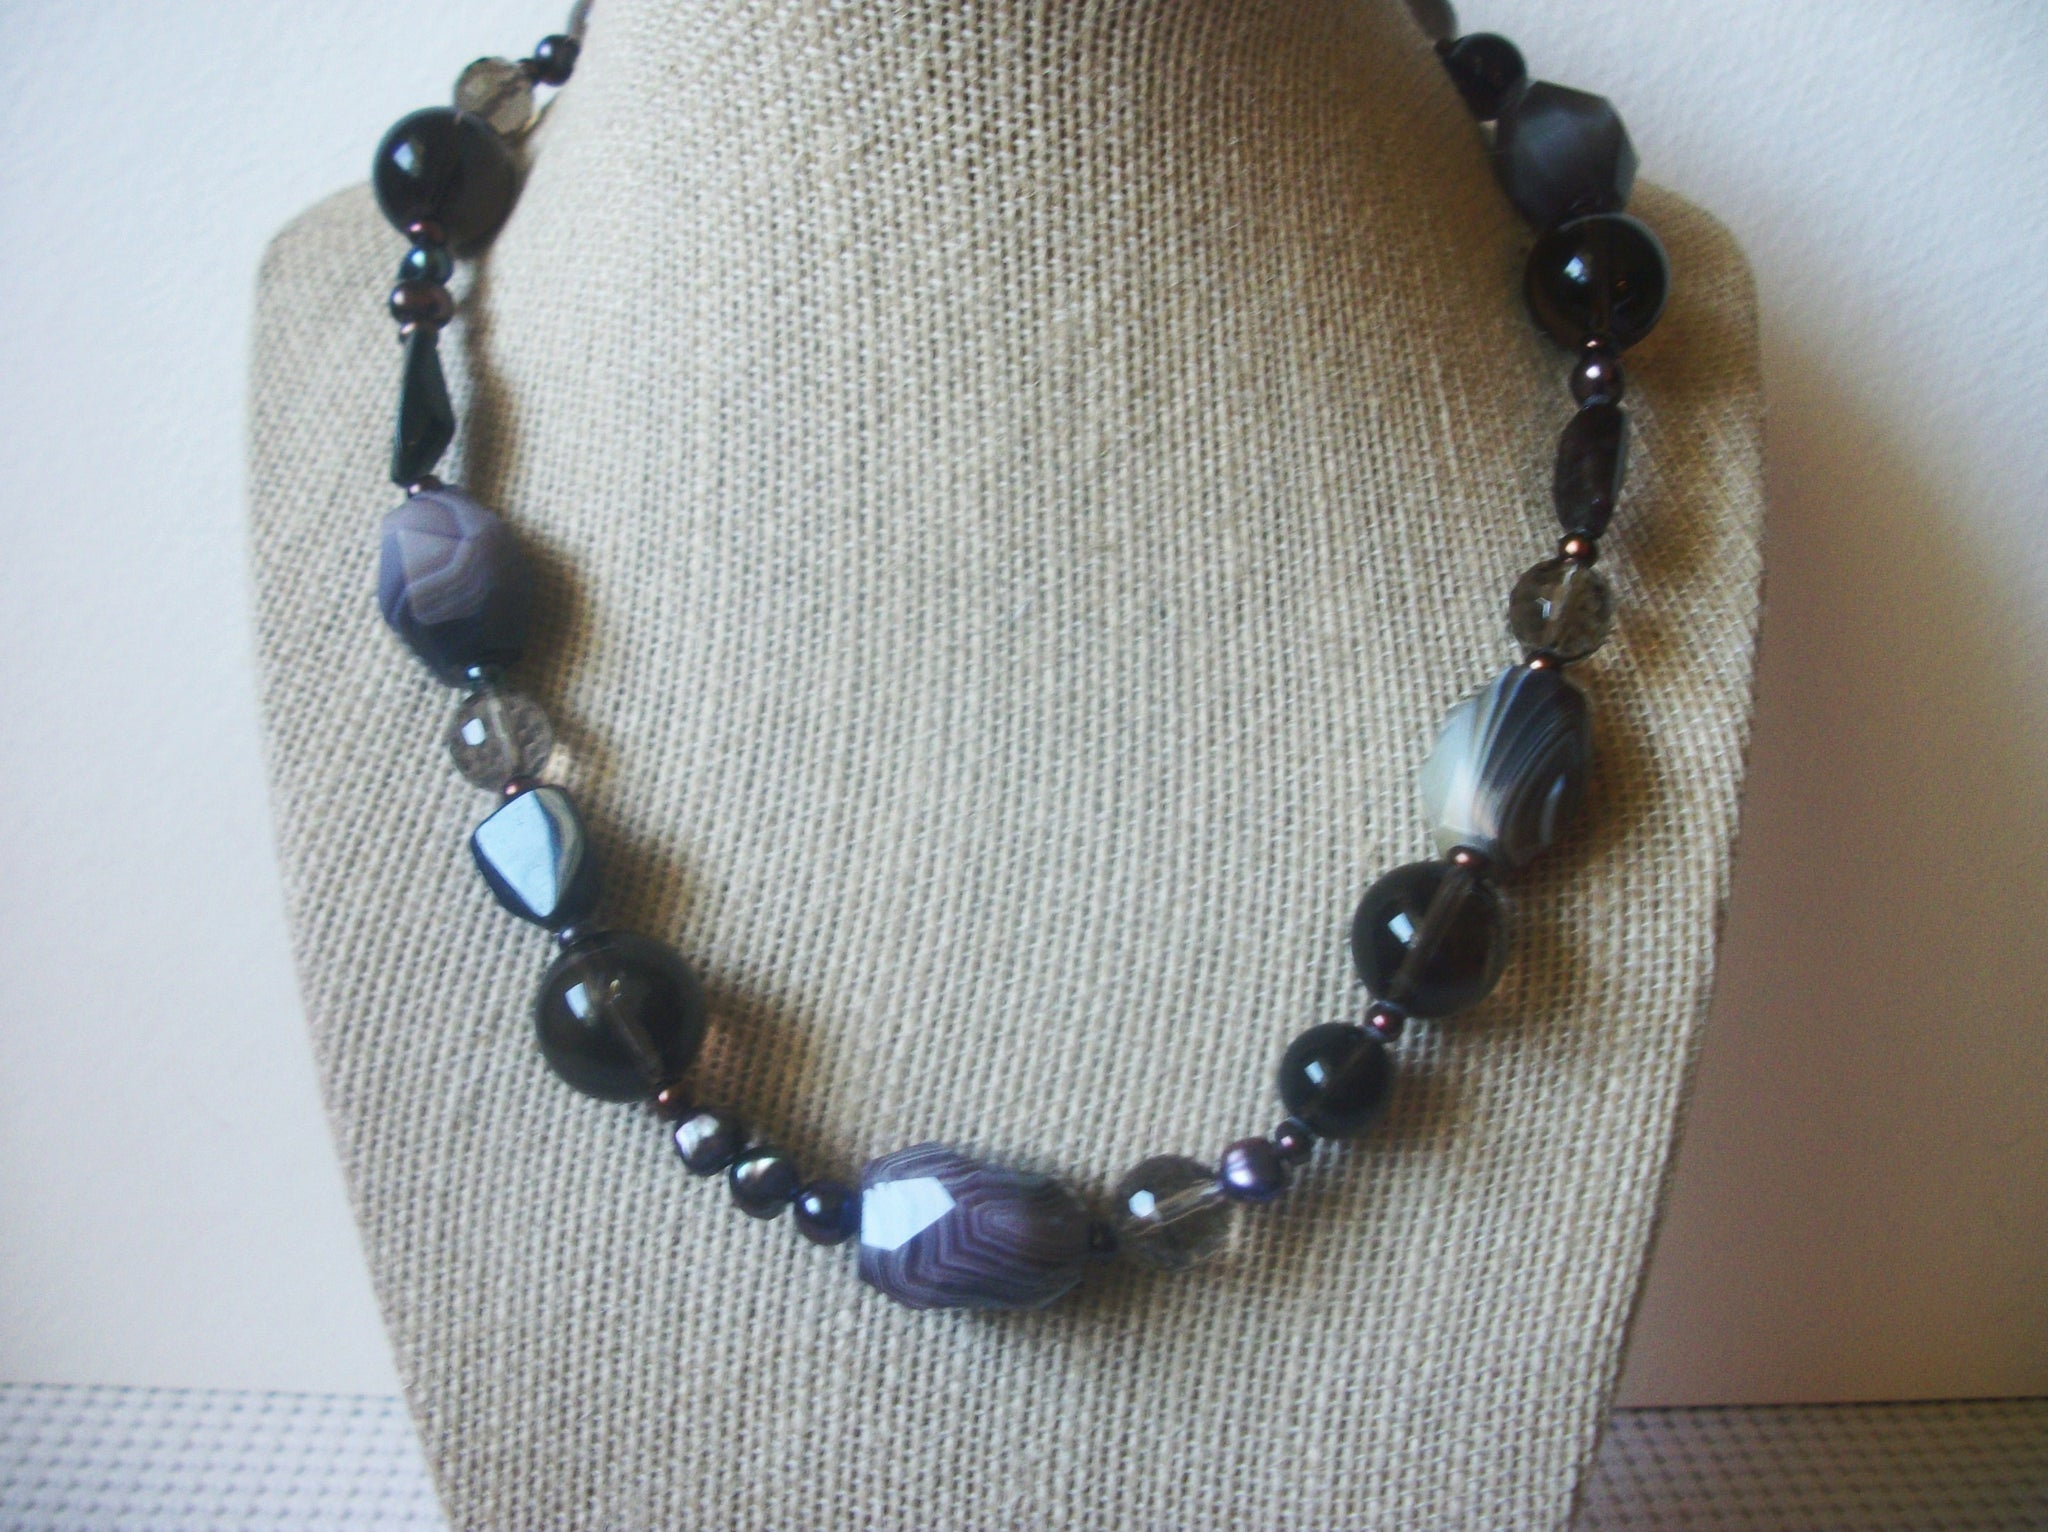 Vintage Jewelry, 16" - 19" Long, Necklace Hand Made, Botswana Agate Smokey Quartz, Freshwater Pearls, Sterling Silver, Tourmaline Nuggets,  90517